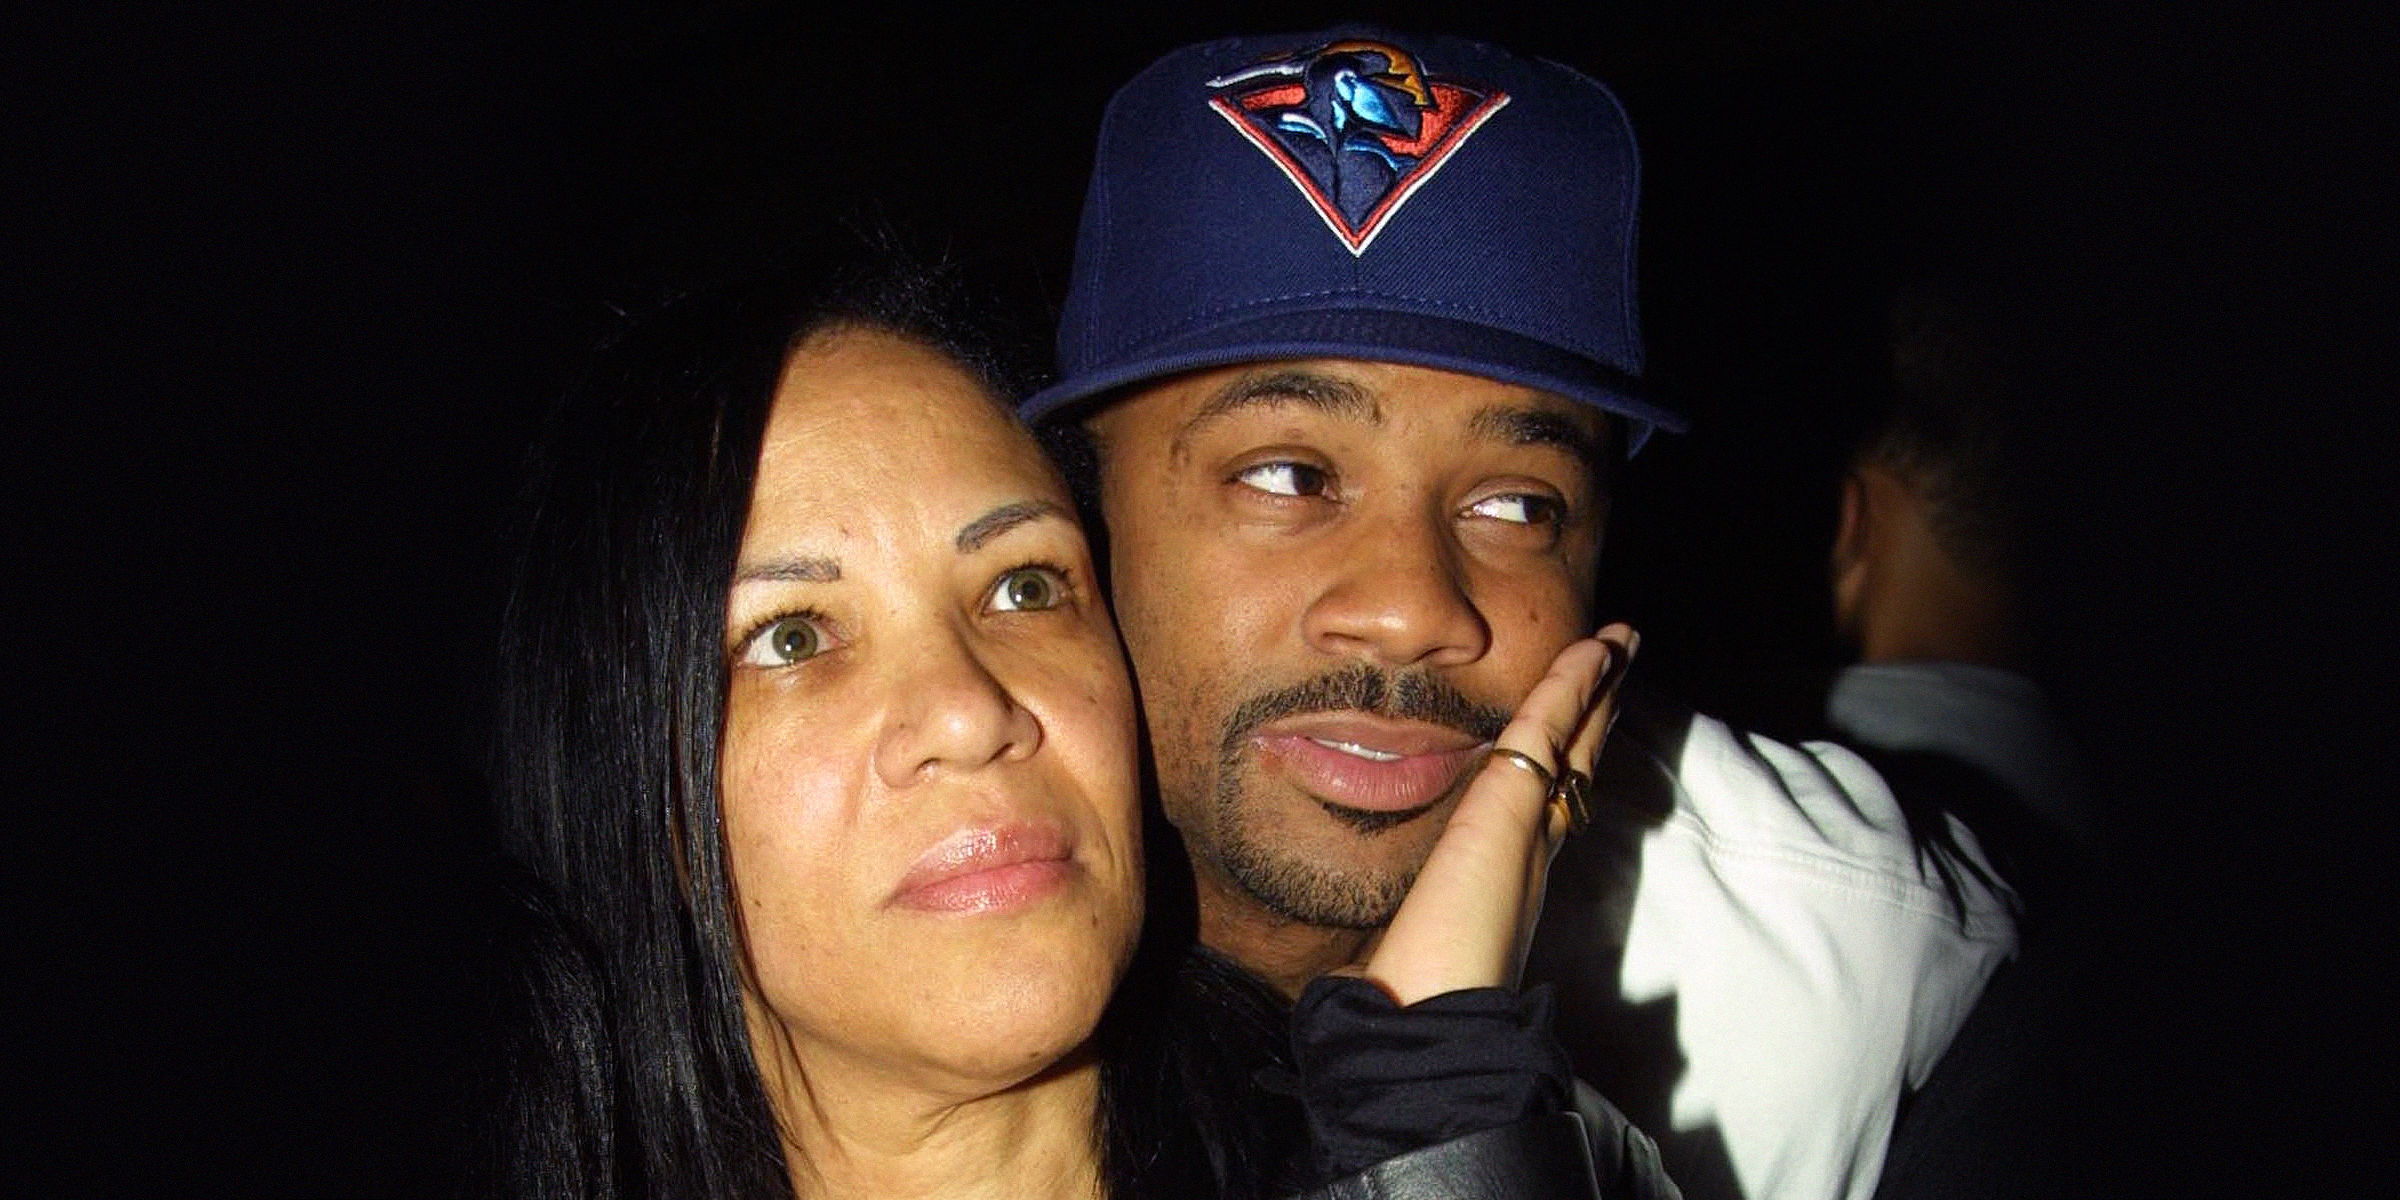 Diana Haughton and Damon Dash. | Source: Getty Images